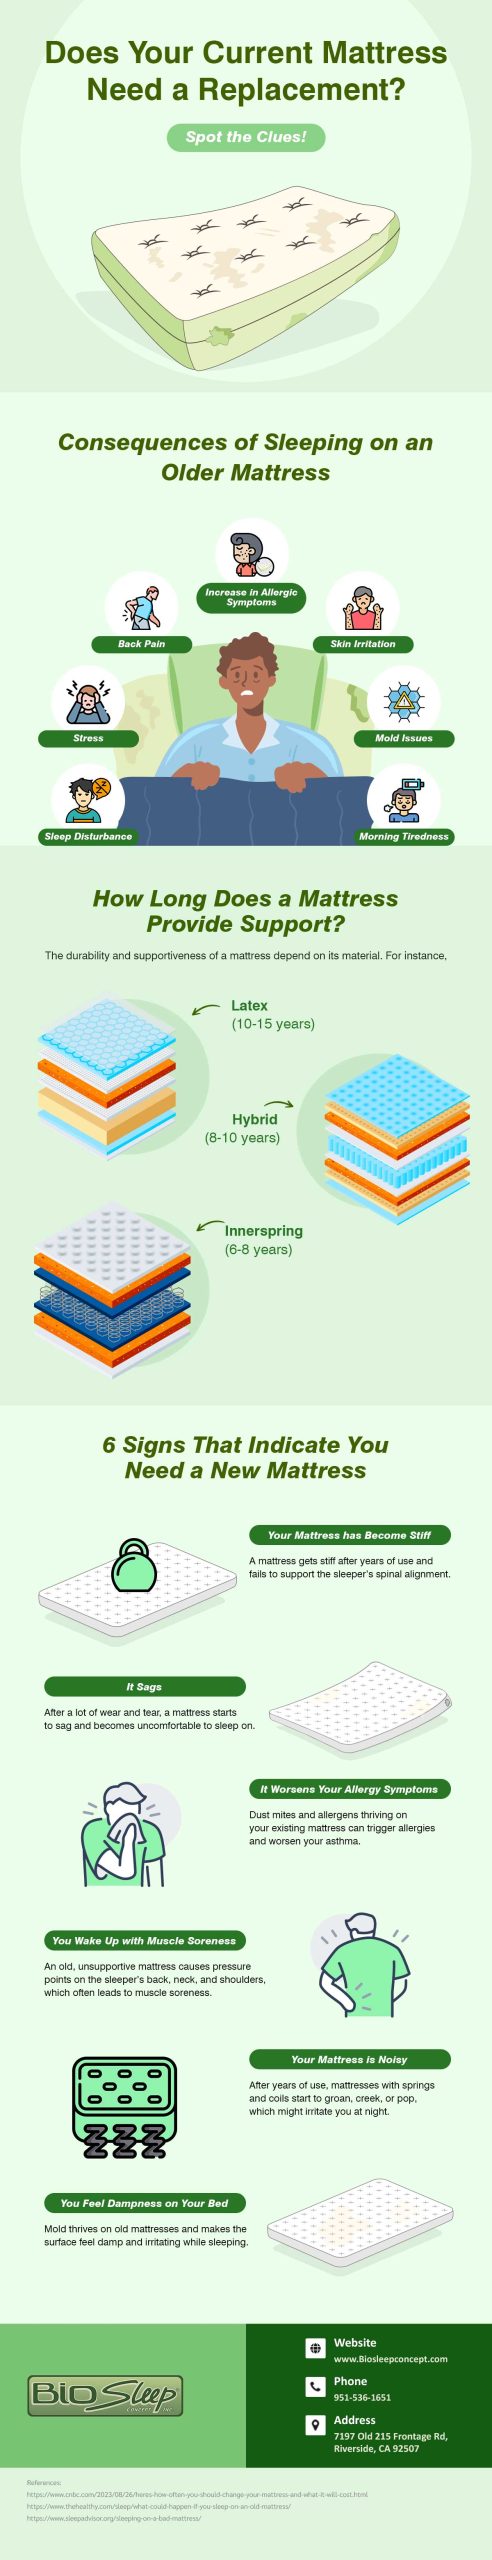 When is the time to replace old mattresses